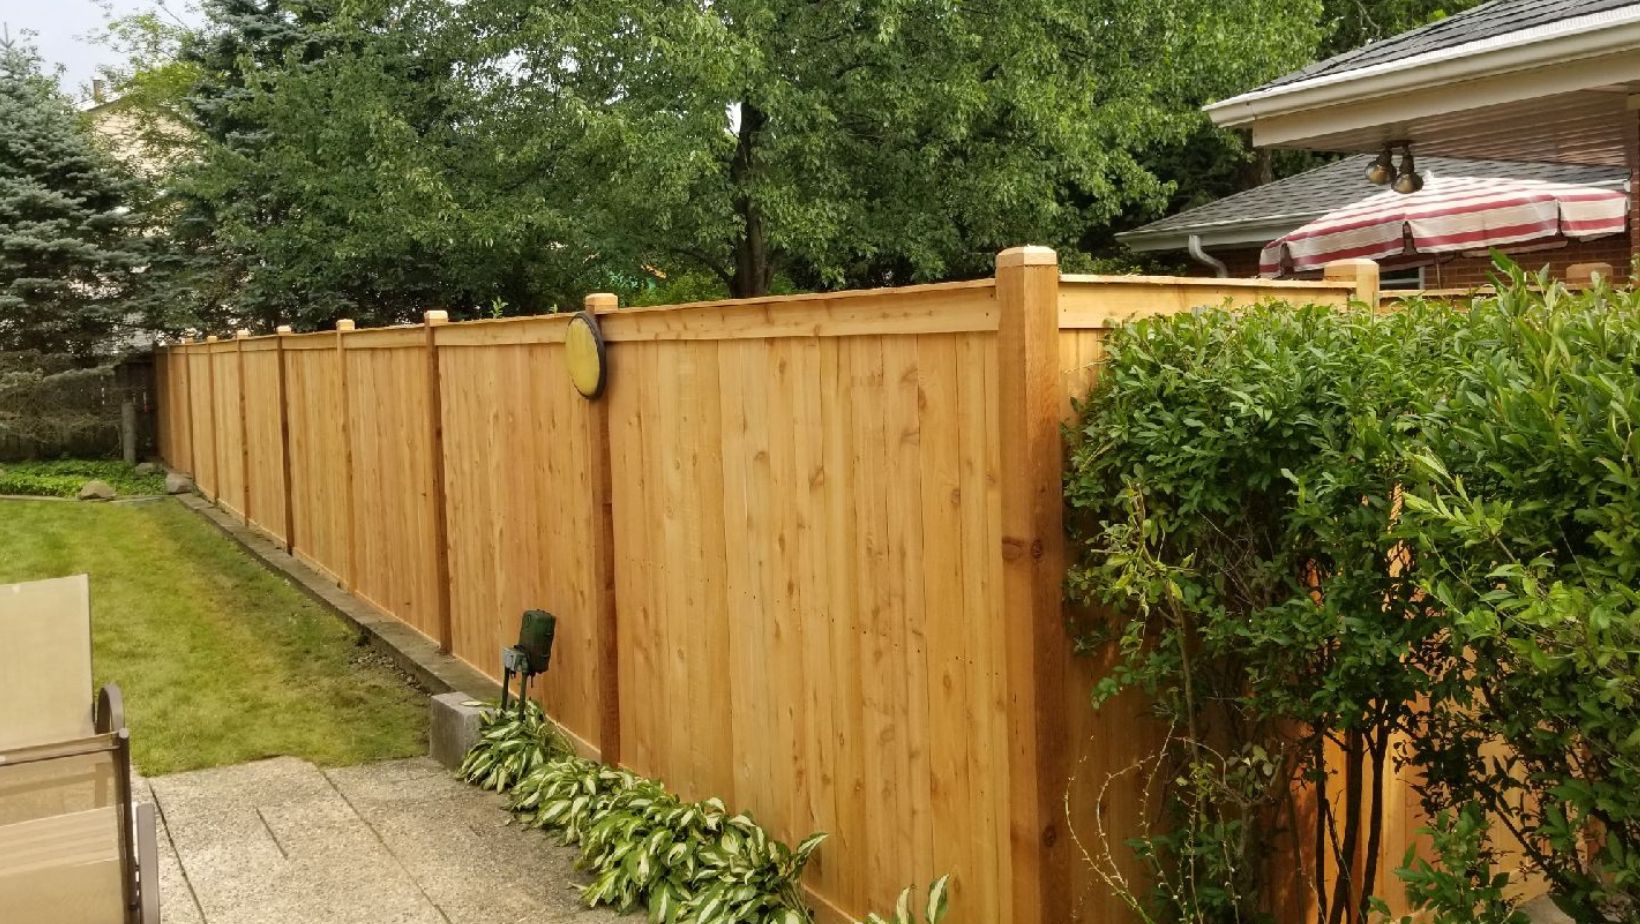 Are There Any Regulations Or Permits Required To Install A Wooden Fence In Residential Areas?